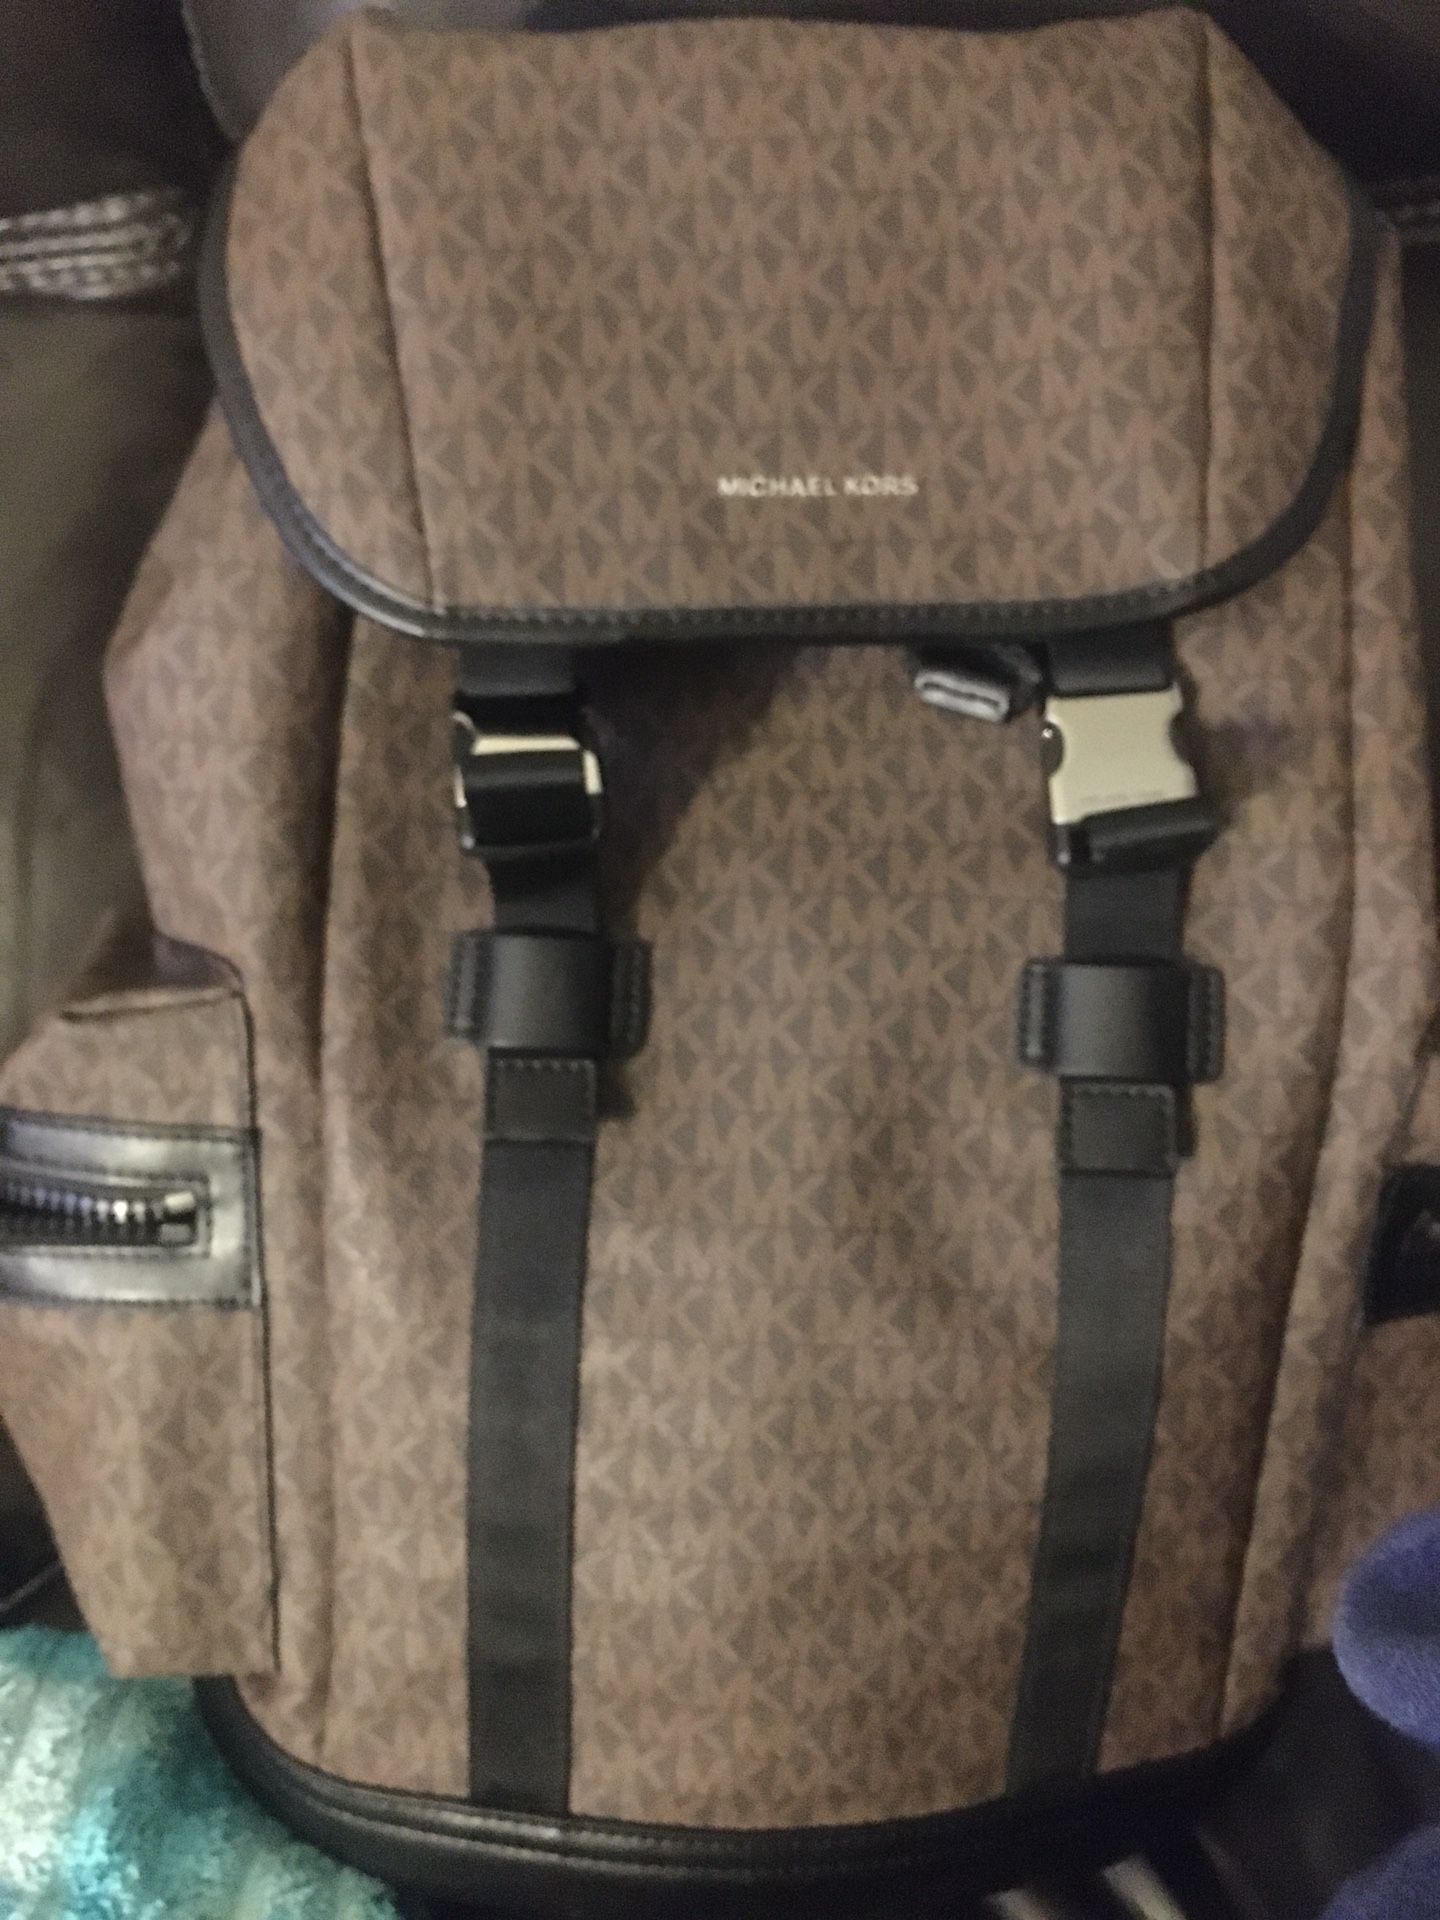 The Dean backpack in Monogram Macassar for Sale in San Diego, CA - OfferUp